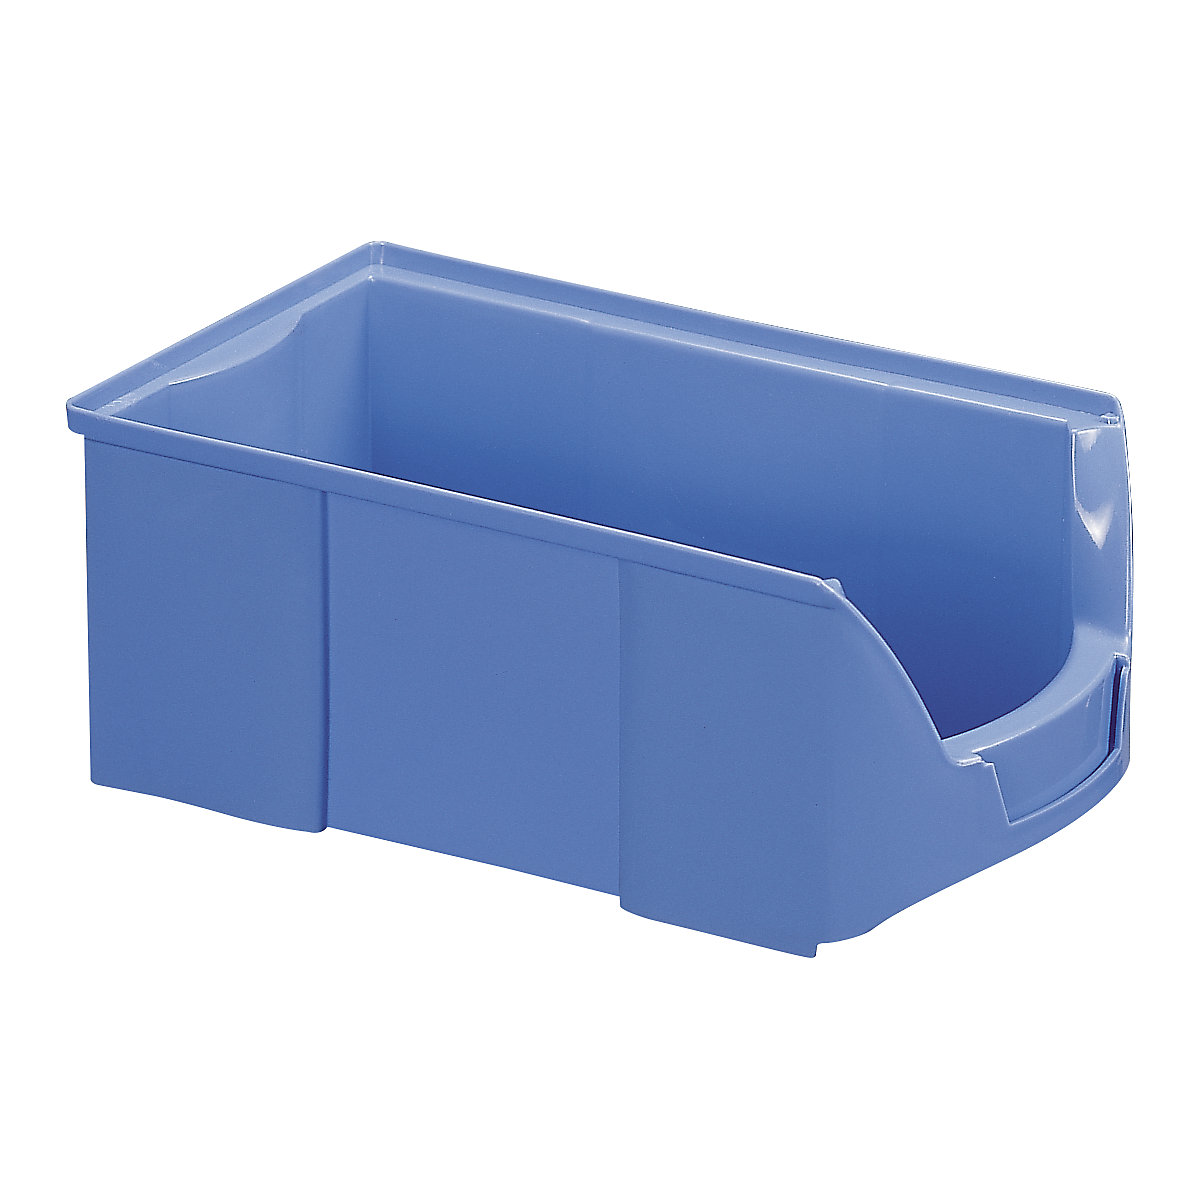 FUTURA open fronted storage bin made of polyethylene, LxWxH 510 x 310 x 201 mm, pack of 6, blue-17